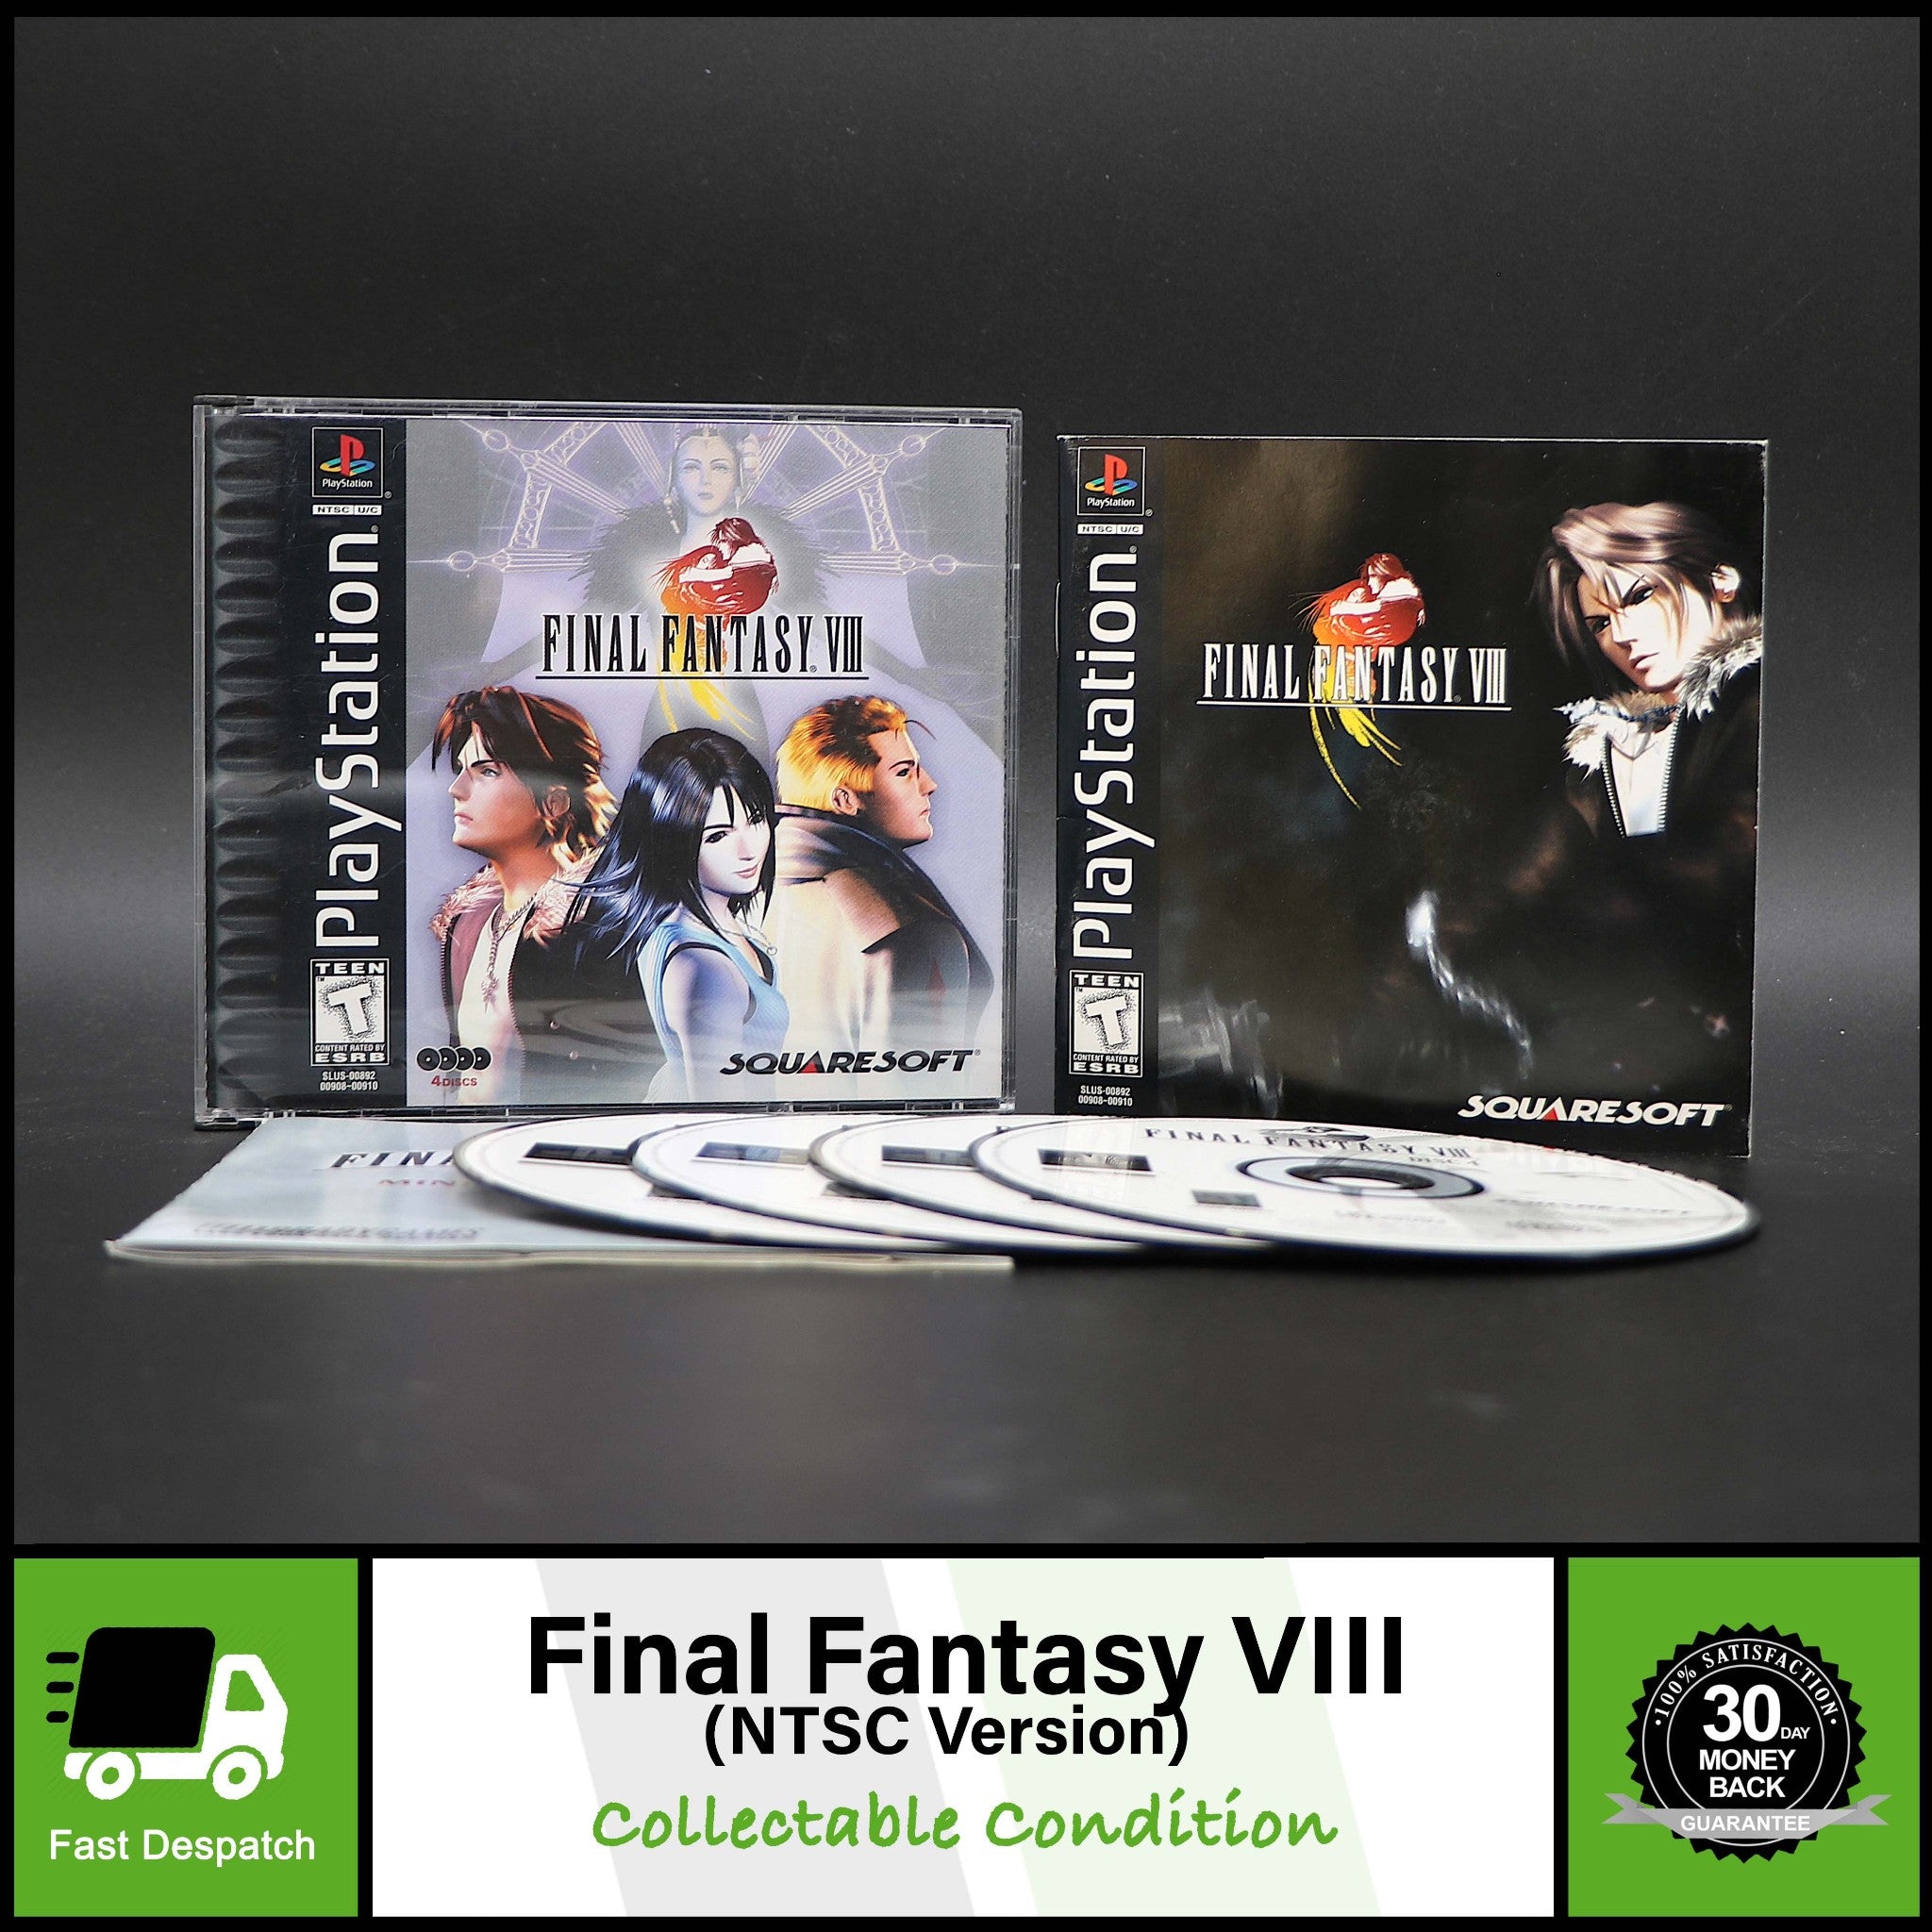 Final Fantasy VIII (8) | Sony PS1 Game | NTSC Version | Collectable Condition!